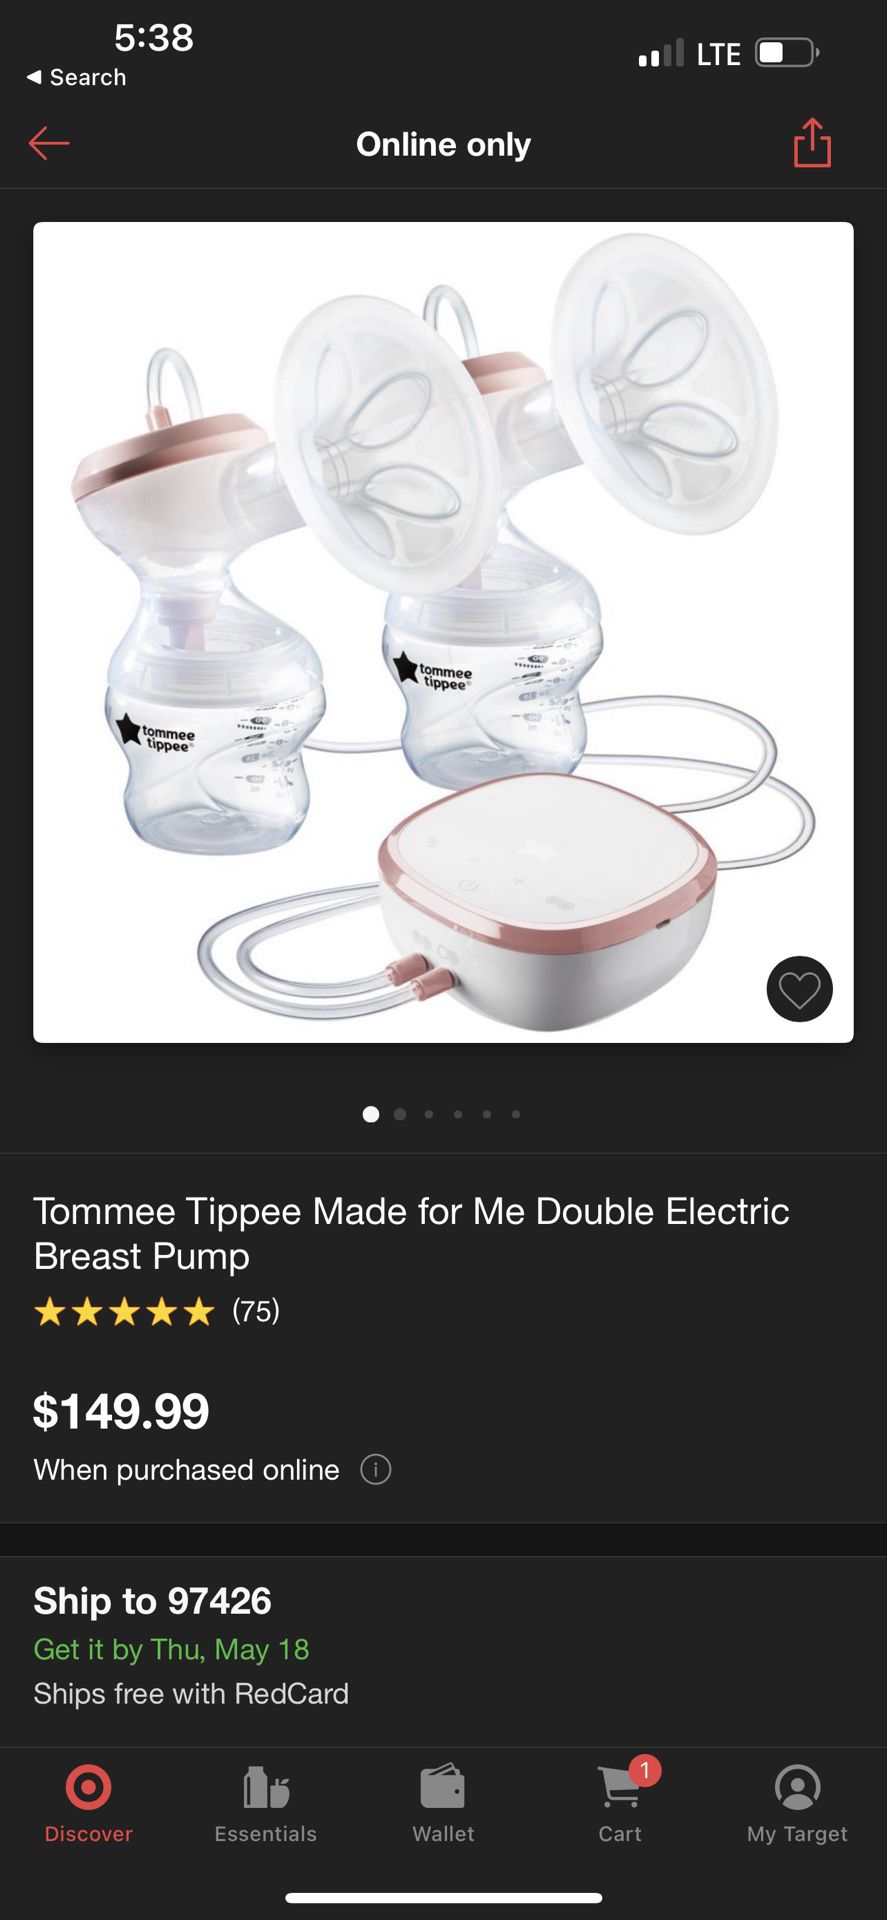 Tommee Tippee Made for Me Double Electric Breast Pump 